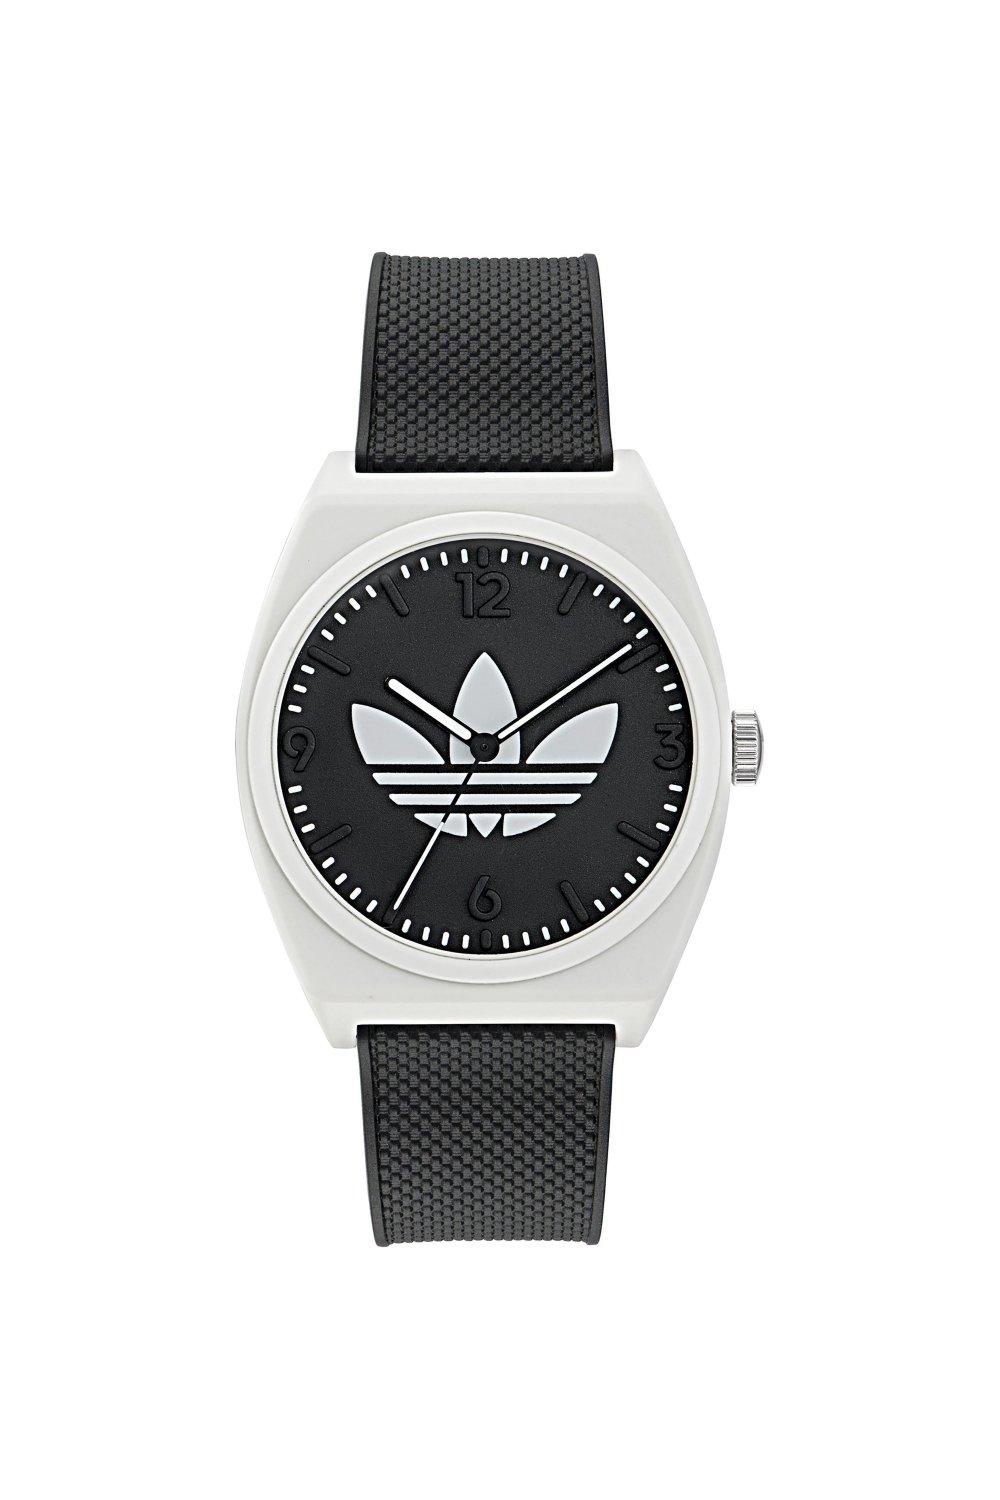 Plastic/resin | | Fashion Quartz - Originals Watch Two adidas Watches Aost23550 Project Analogue